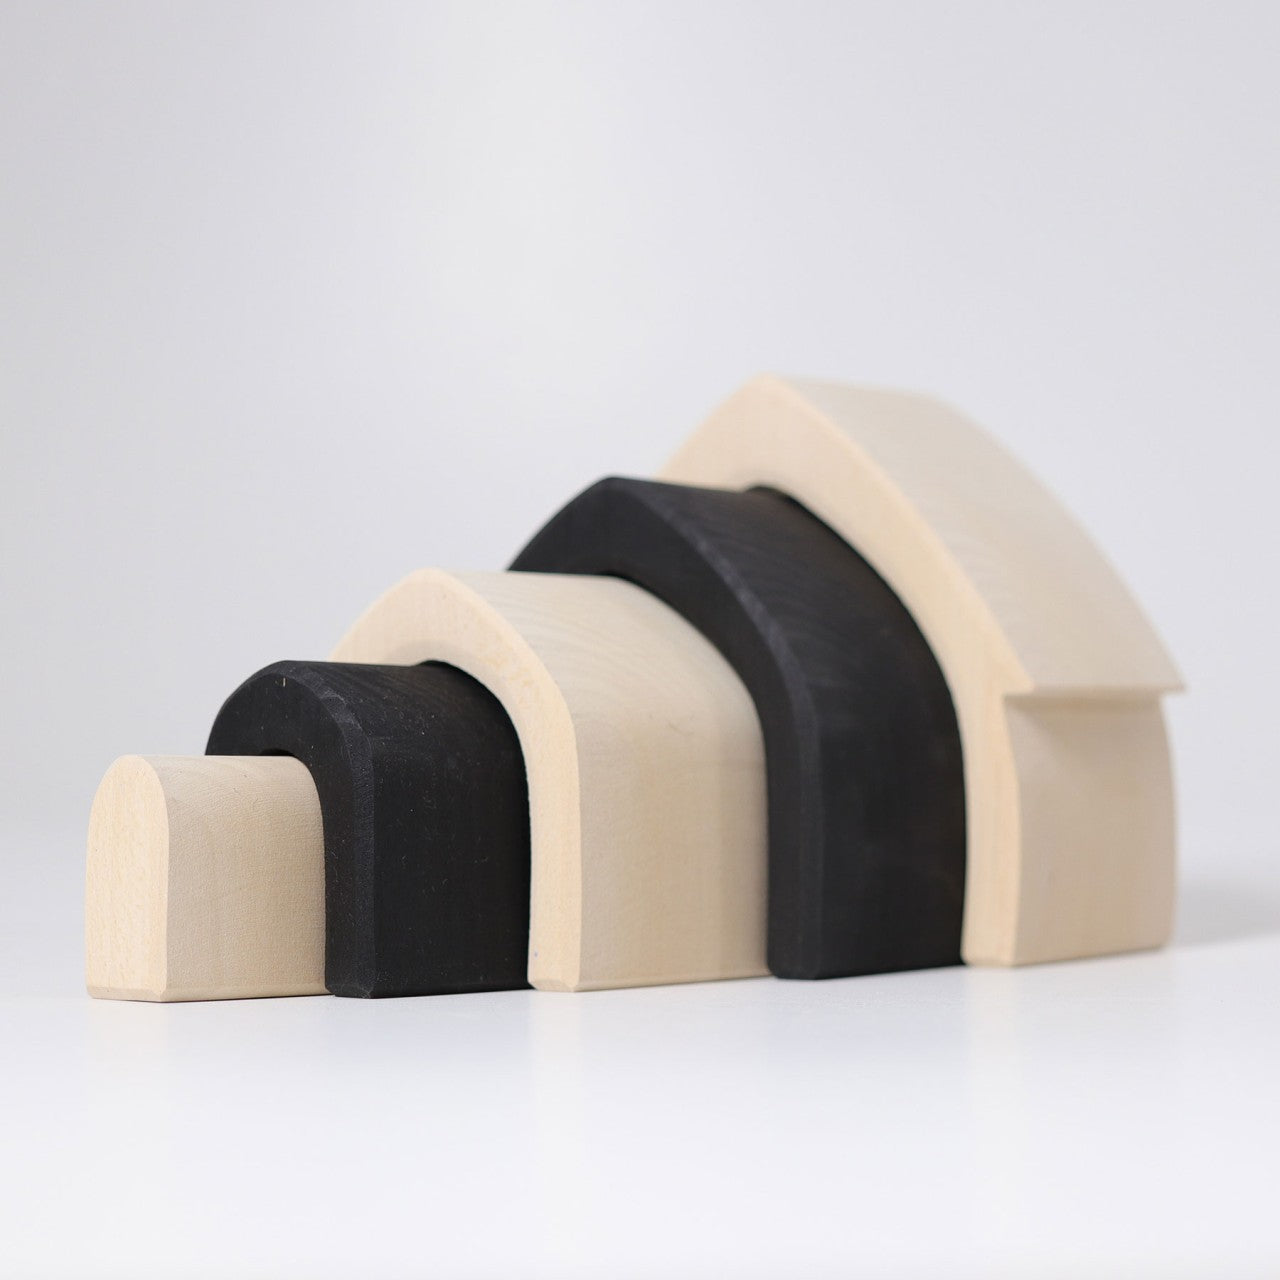 Monochrome House | 5 Pieces | Wooden Toys for Kids | Open-Ended Play